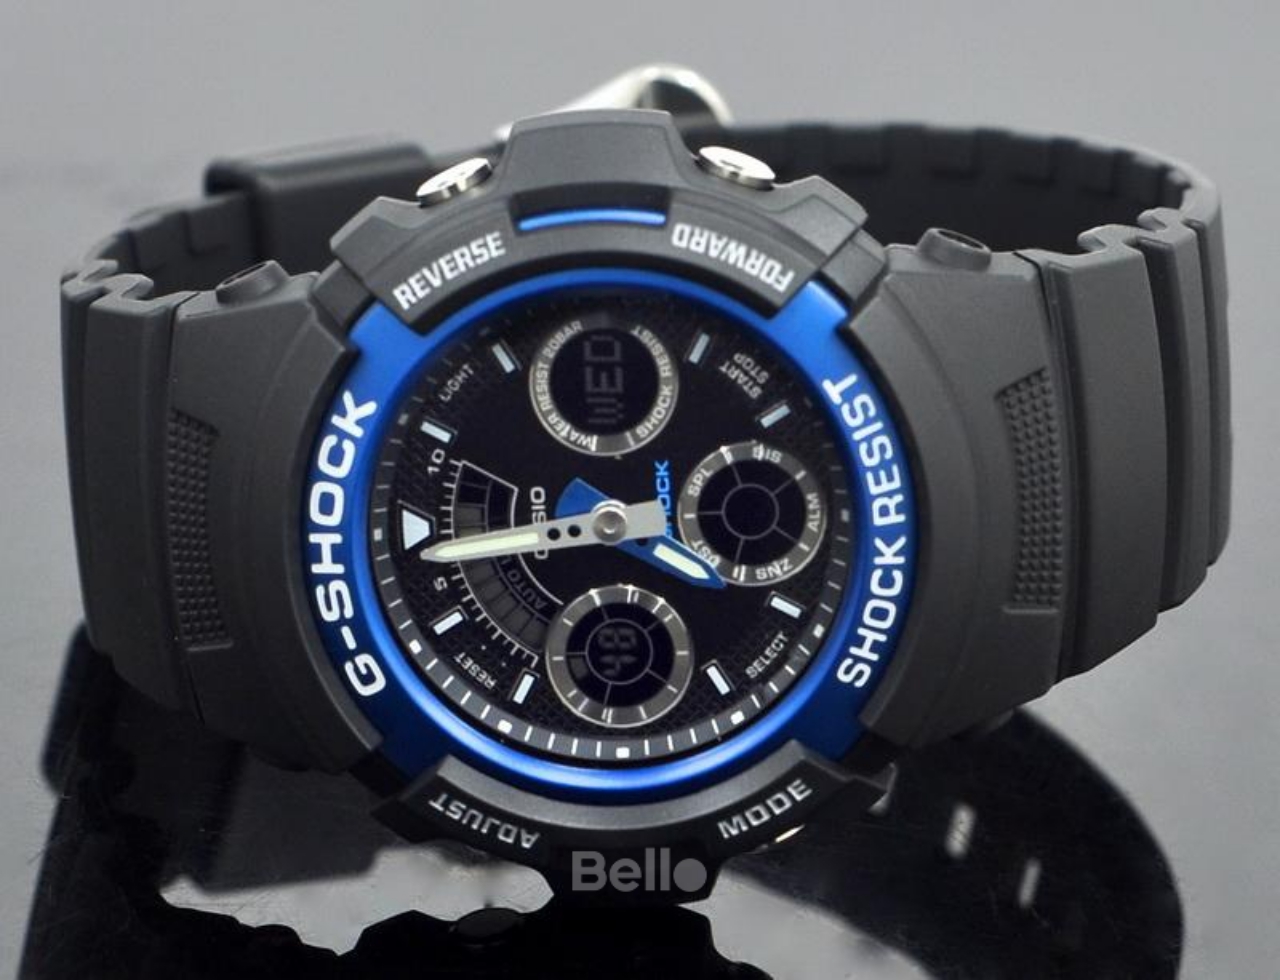 dong-ho-g-shock-aw-591